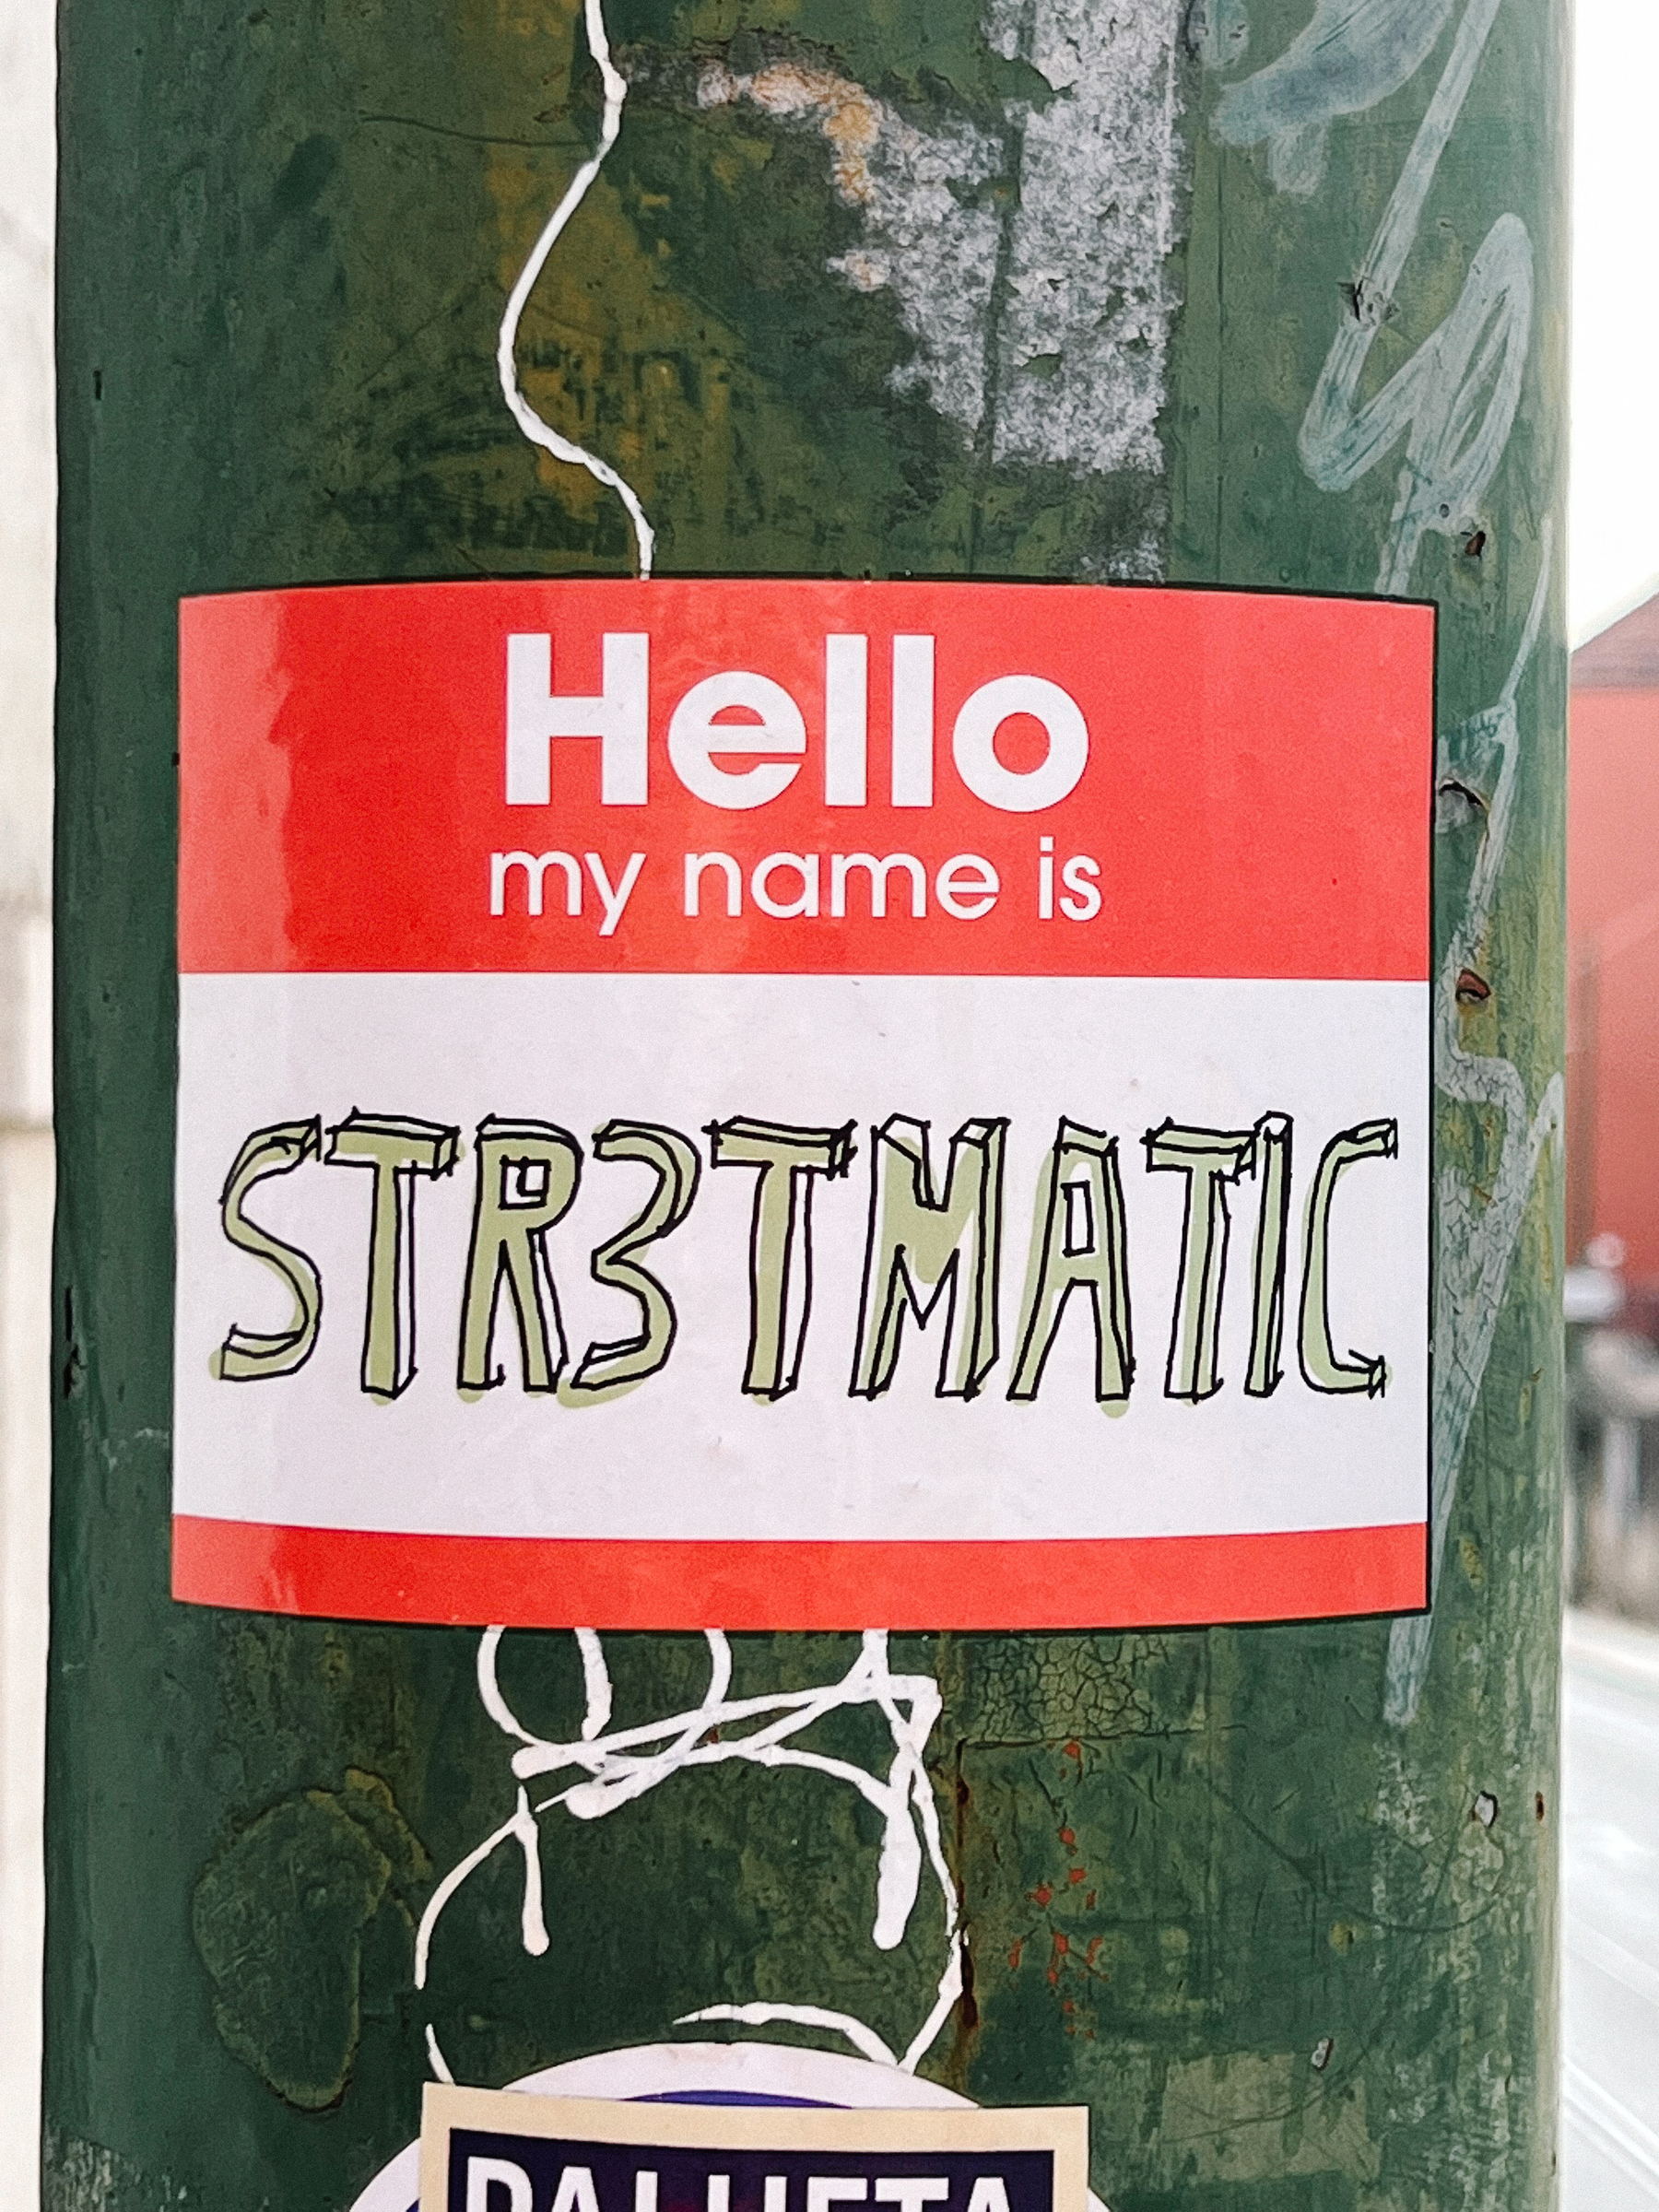 Name tag. “Hello, my name is: STR3TMATIC”. 